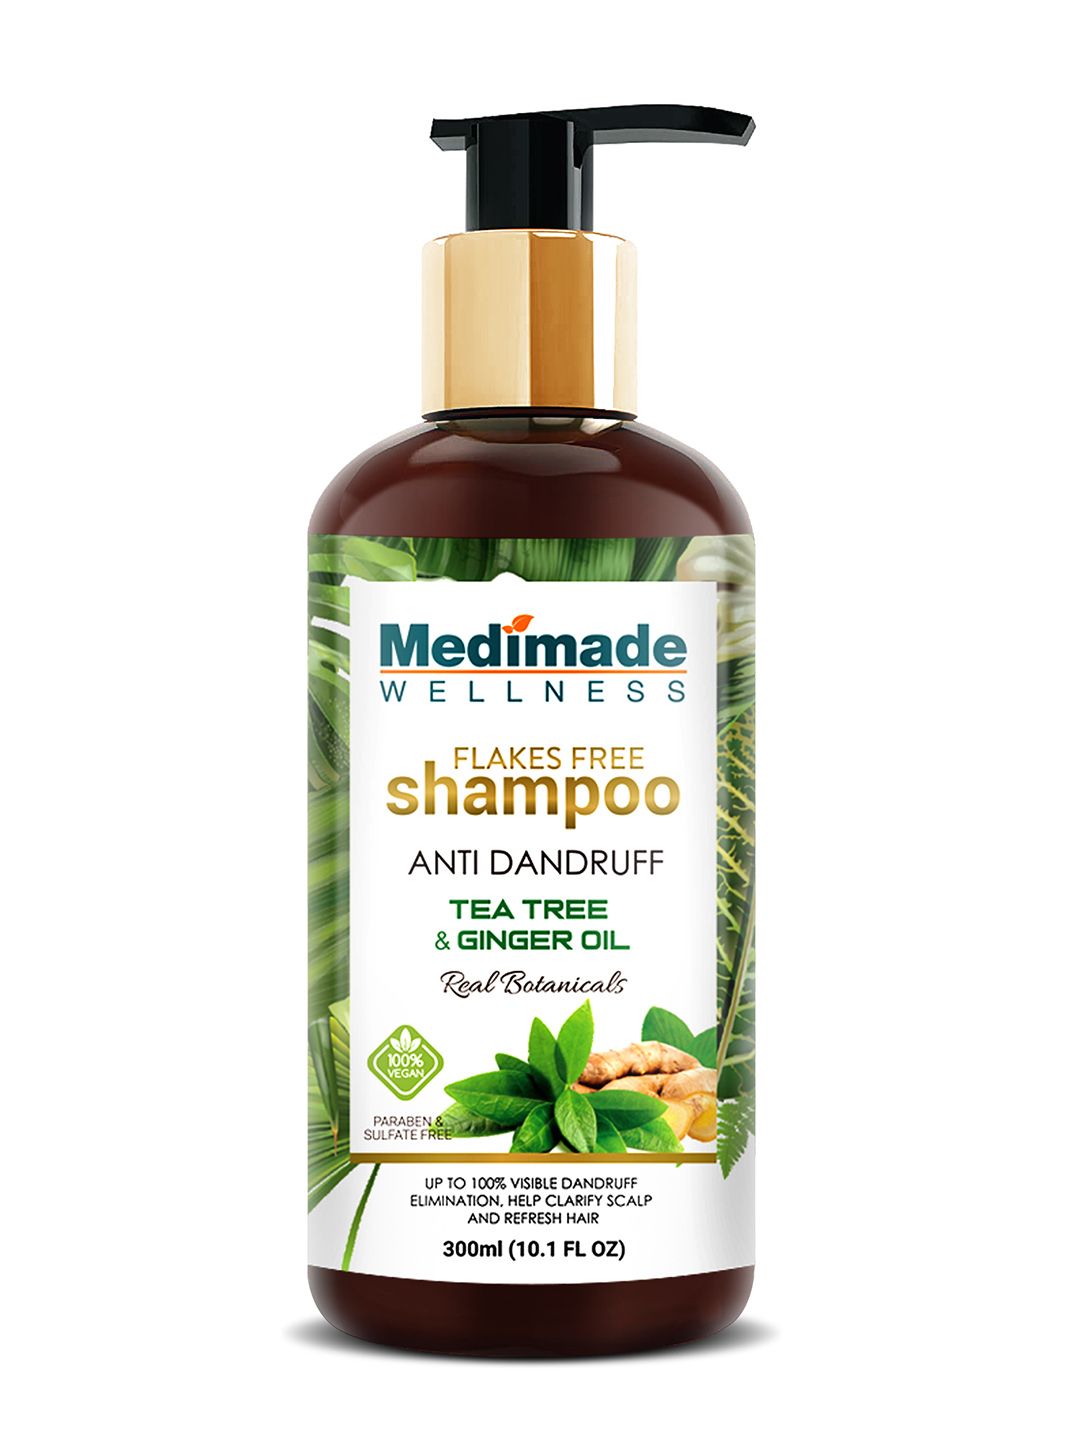 Medimade Anti Dandruff Shampoo with Tea Tree and Ginger Oil - 300 ml Price in India